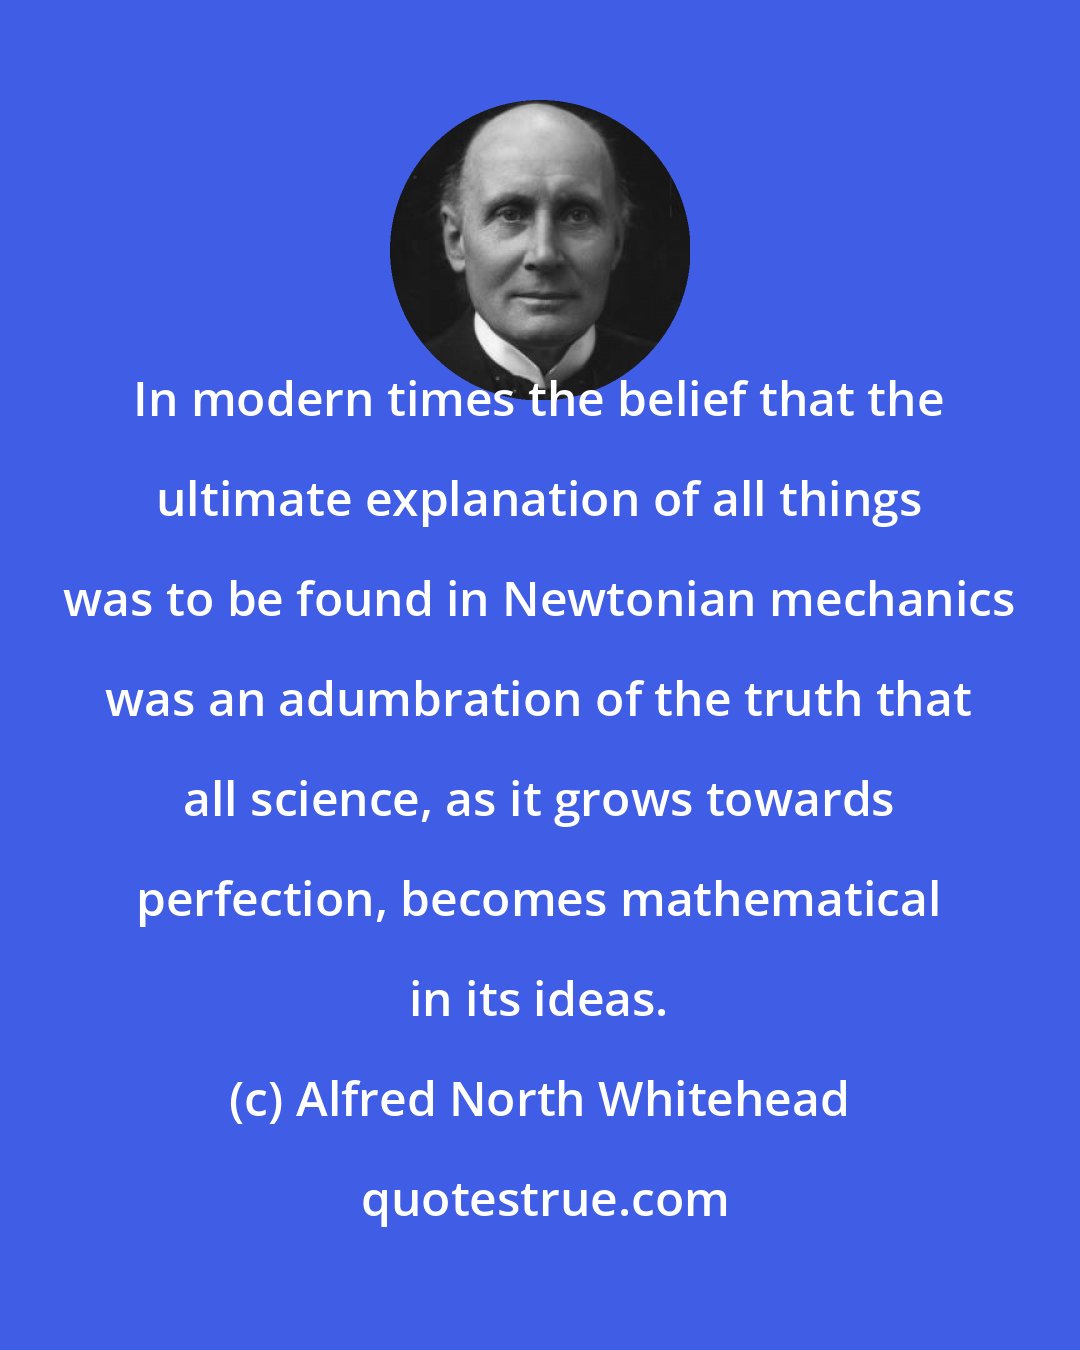 Alfred North Whitehead: In modern times the belief that the ultimate explanation of all things was to be found in Newtonian mechanics was an adumbration of the truth that all science, as it grows towards perfection, becomes mathematical in its ideas.